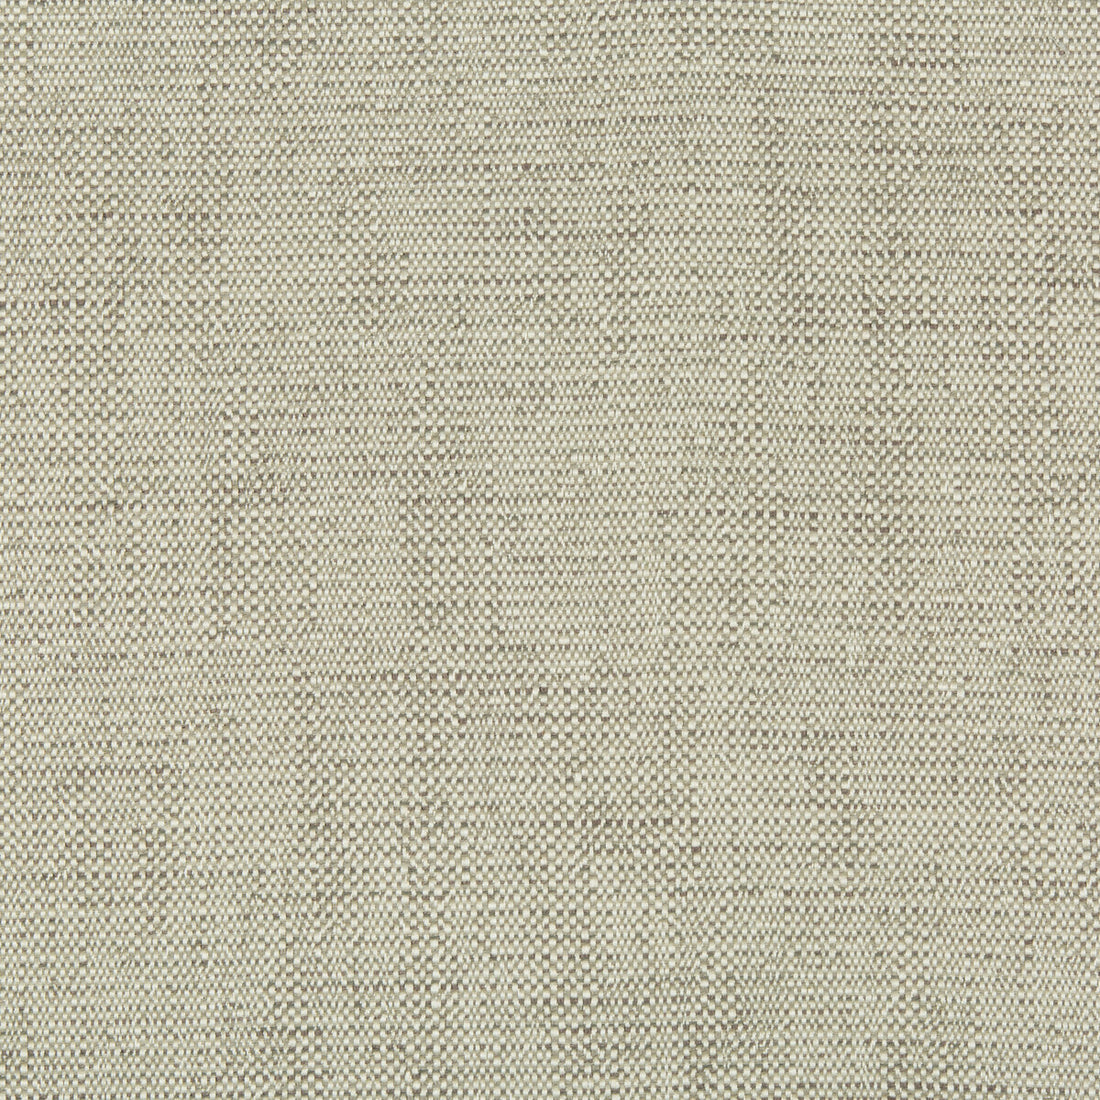 Kravet Design fabric in 35135-11 color - pattern 35135.11.0 - by Kravet Design in the Performance Crypton Home collection